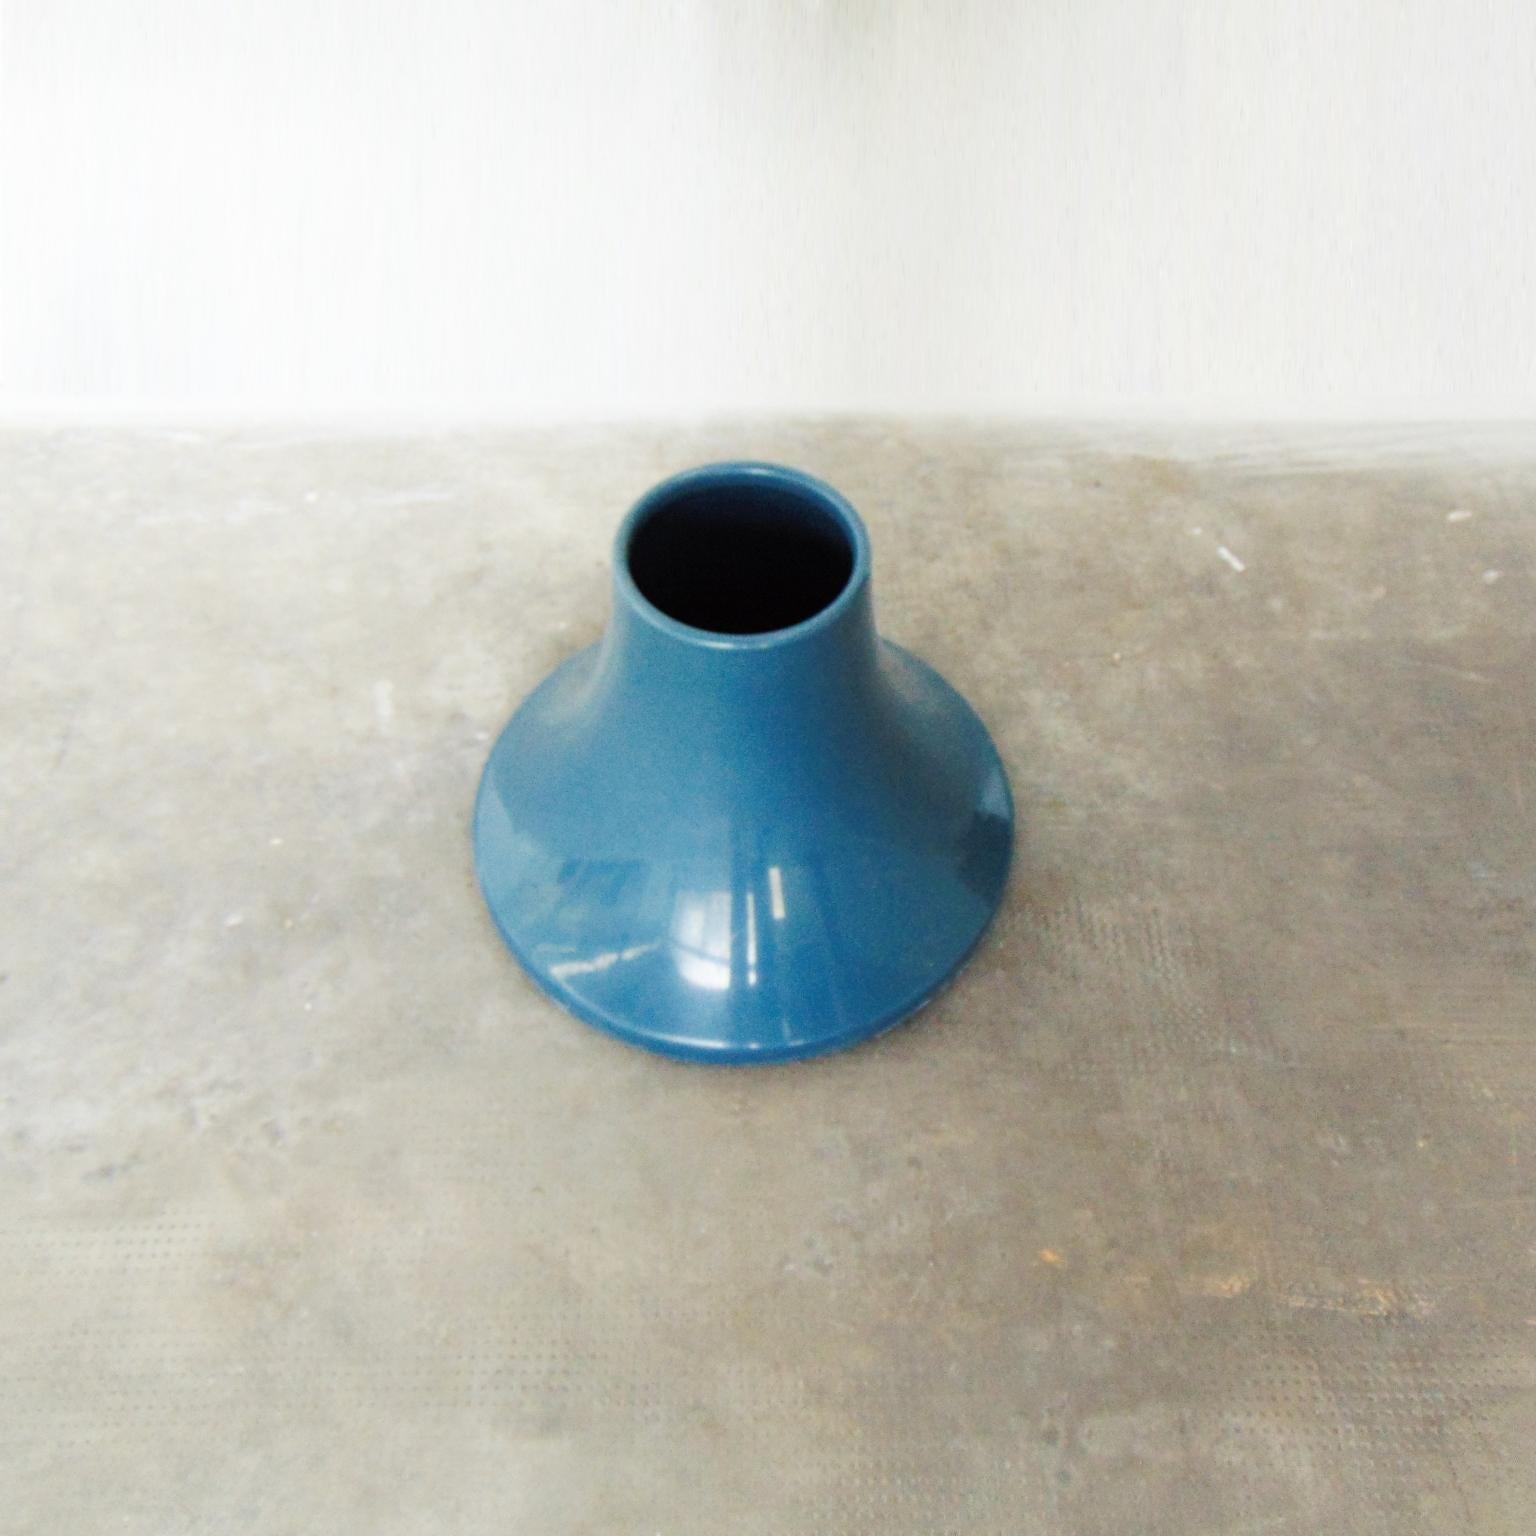 1972 Umbrella Stand in Blue Thermoformed Plastic by R. Lera for Sormani, Italy For Sale 3